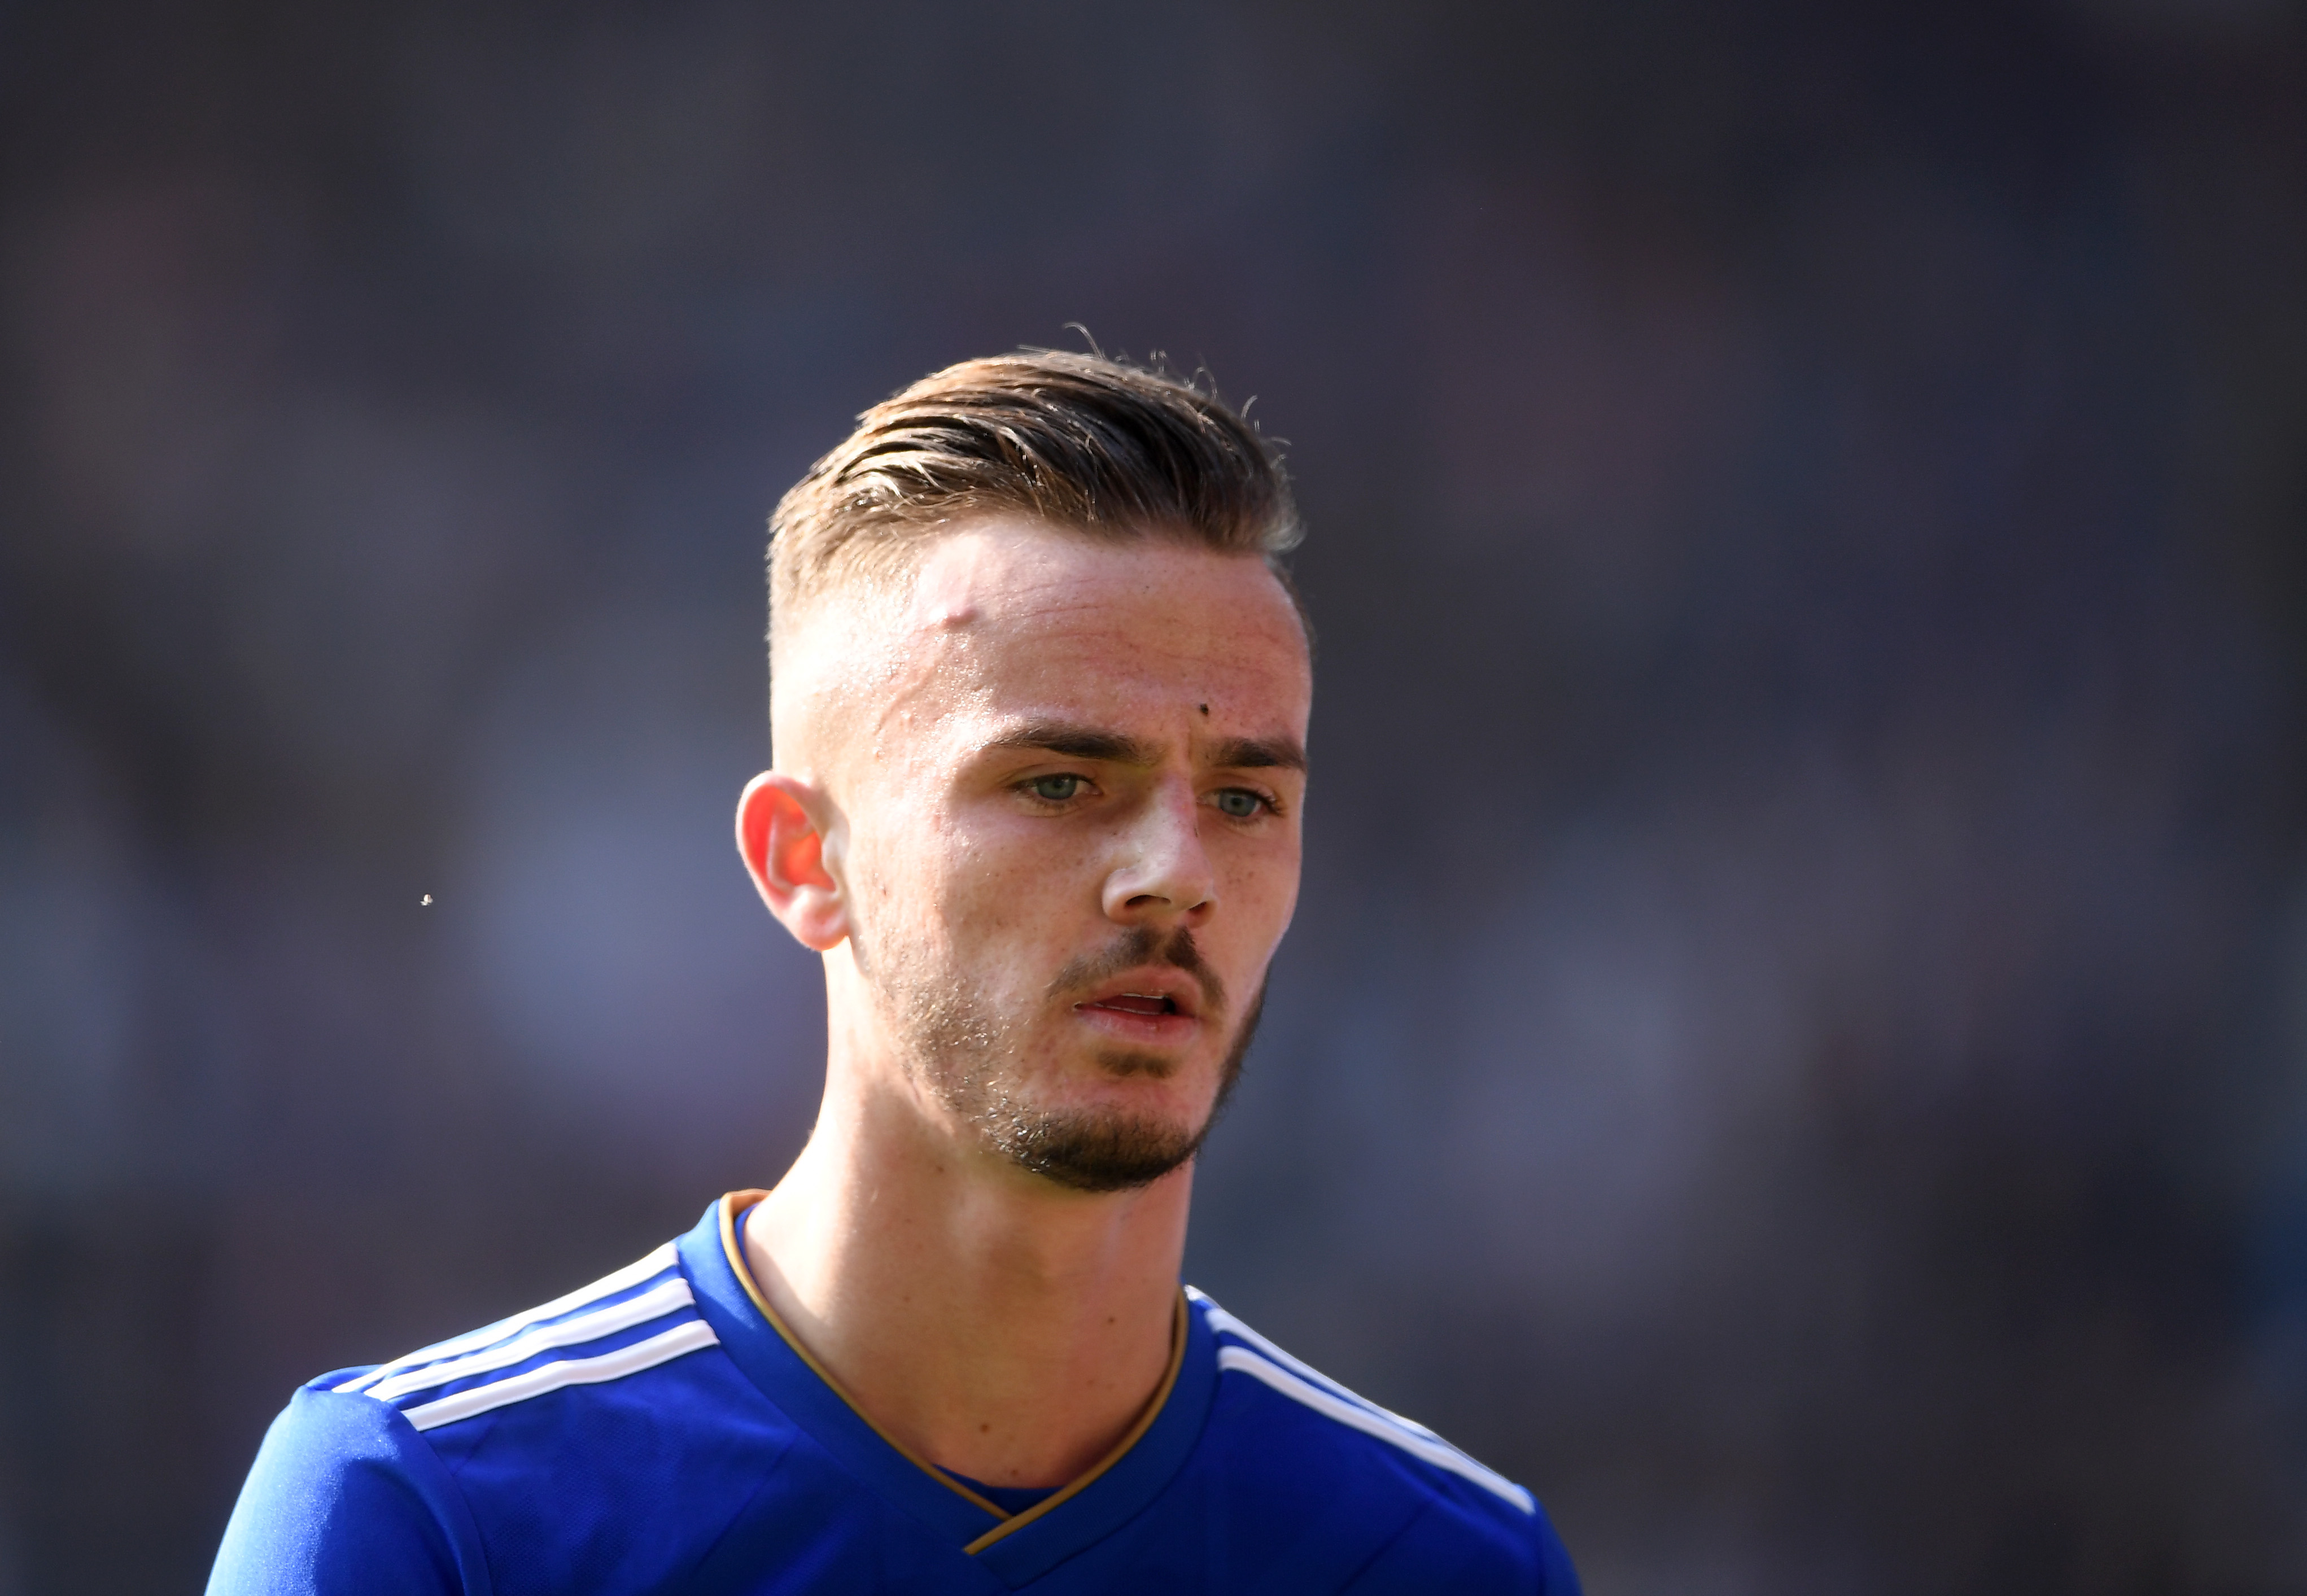 Can Maddison continue his good form under Rodgers next season? (Photo by Laurence Griffiths/Getty Images)